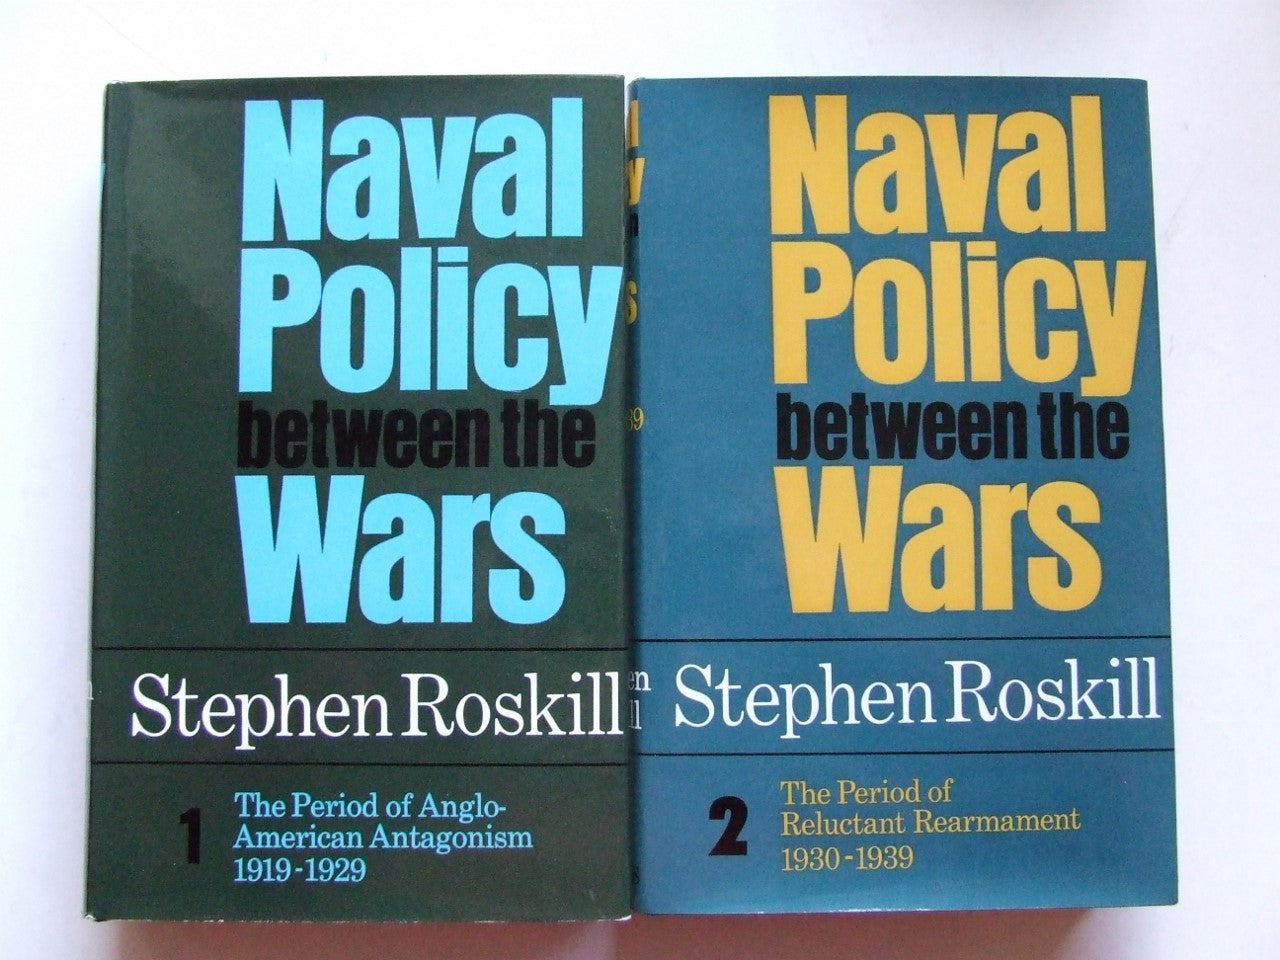 Naval Policy Between the Wars